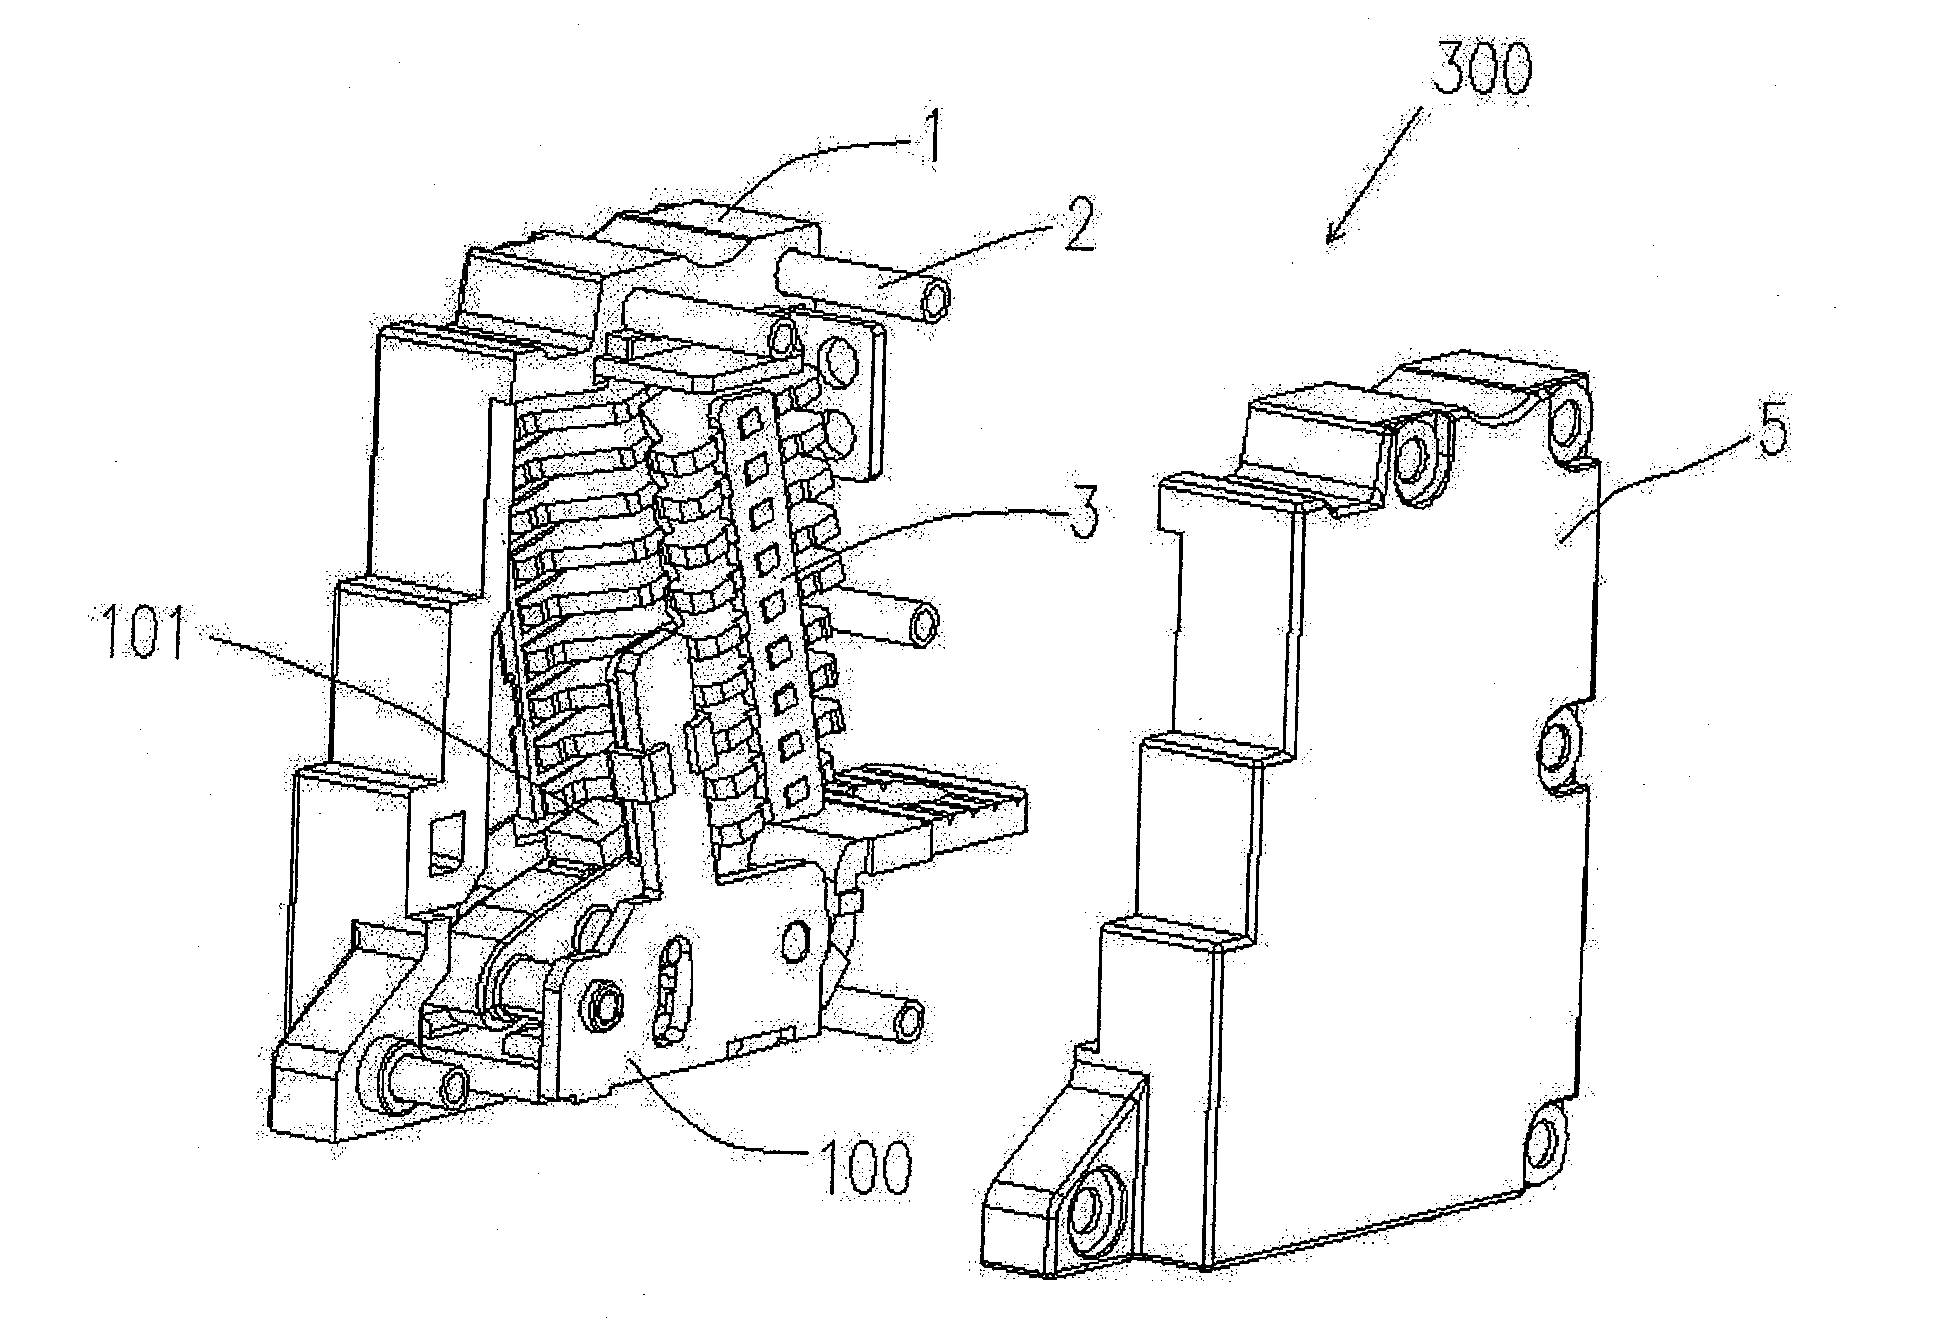 Contact system of plastic case breaker